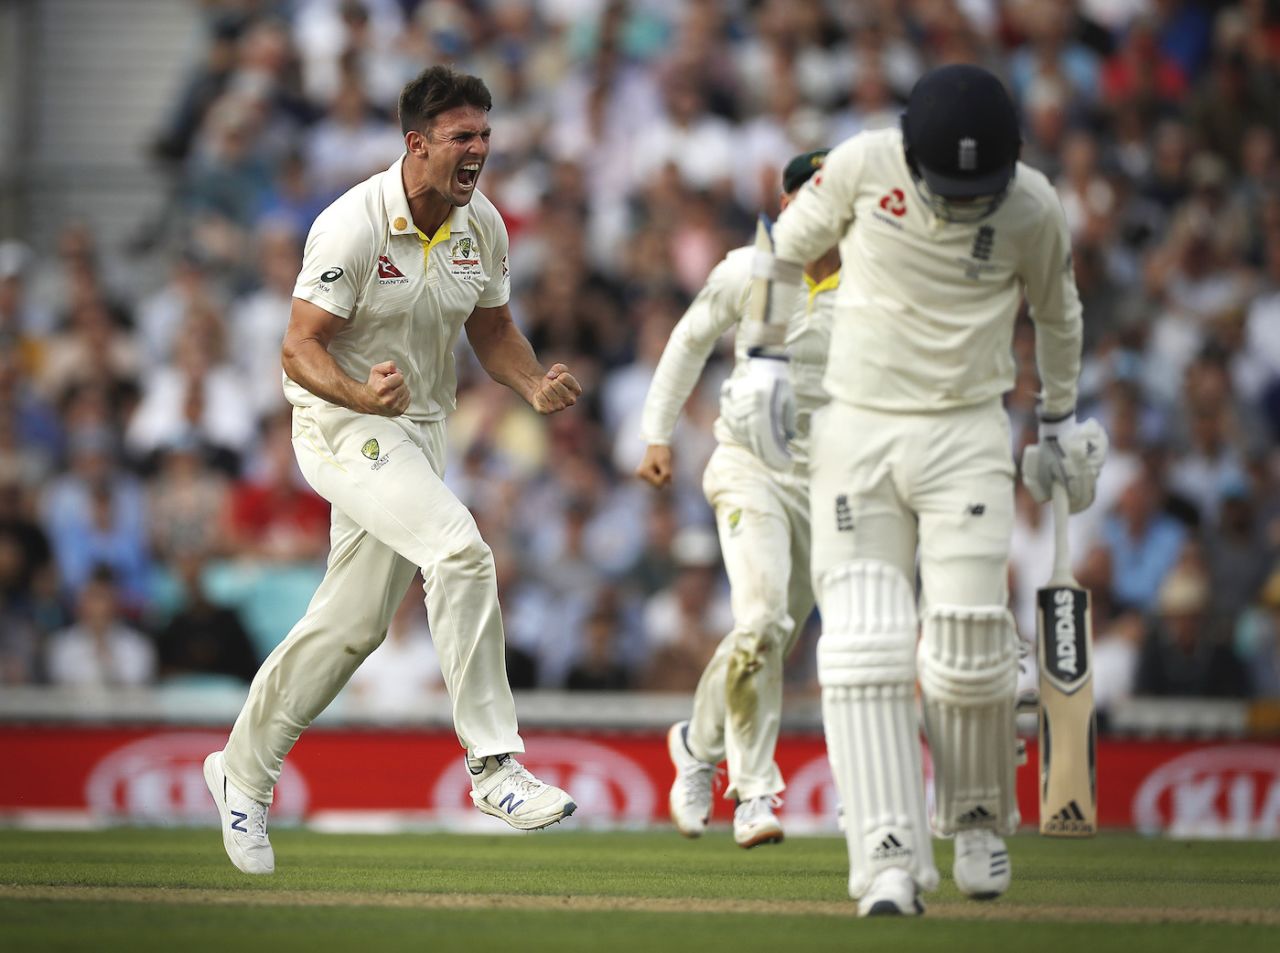 Mitchell Marsh celebrates the wicket of Sam Curran, England v Australia, 5th Test, The Oval, September 12, 2019